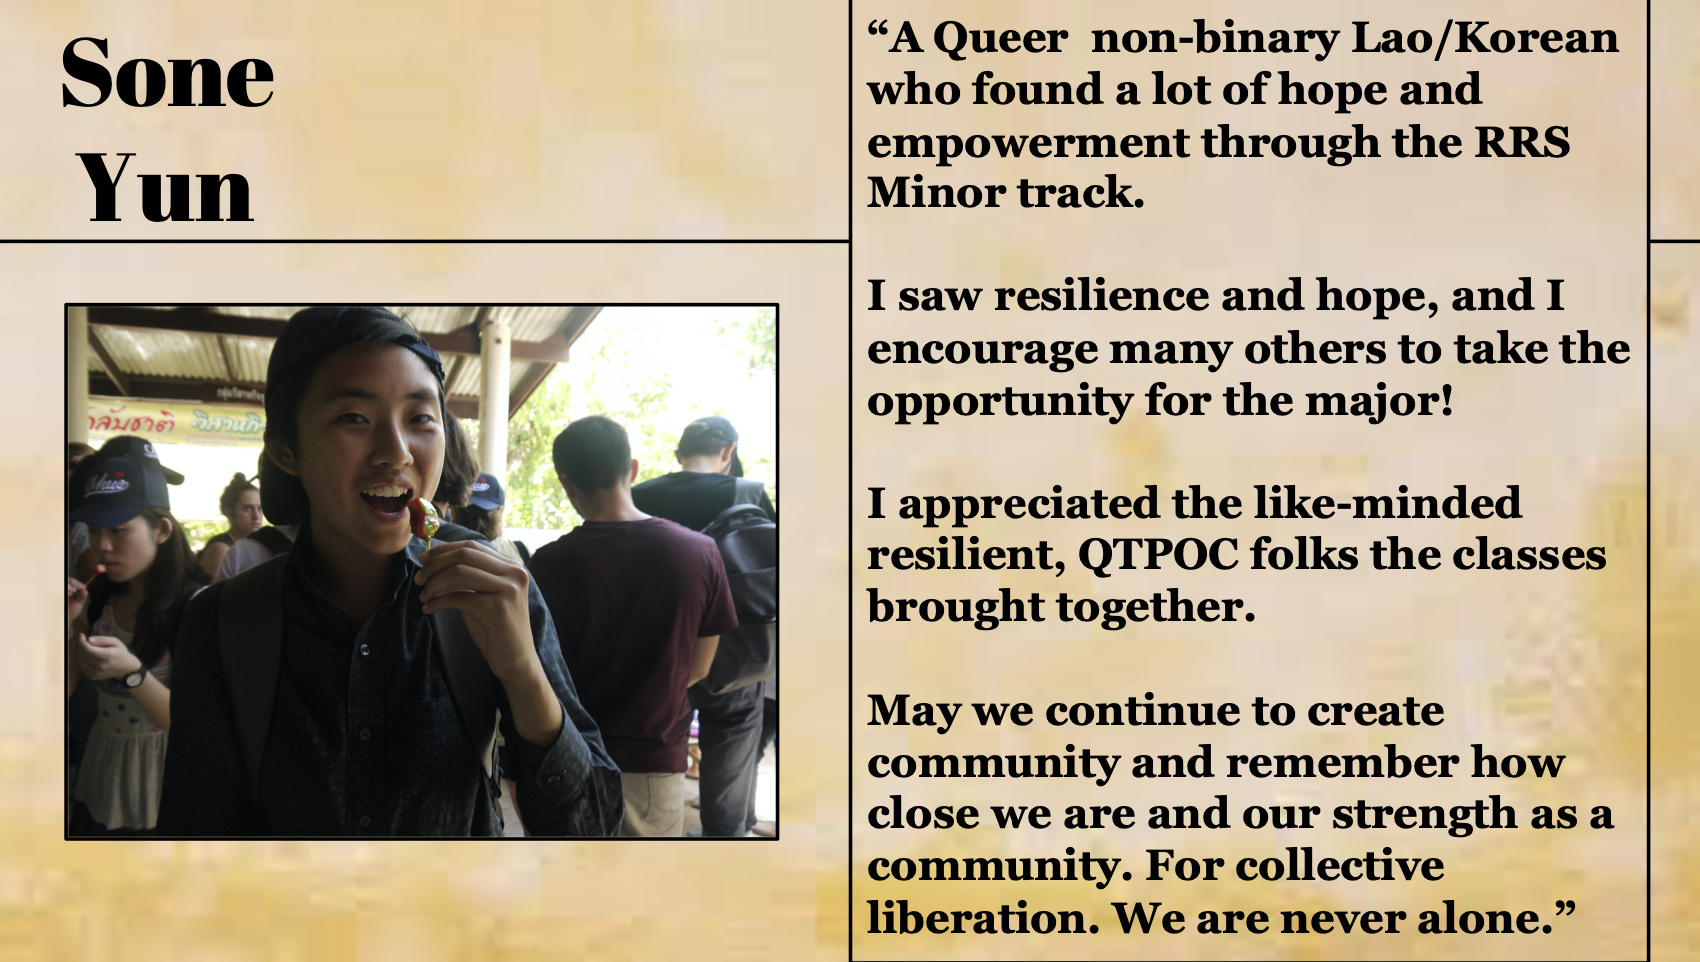 Sone Yun. A Queer non-binary Lao/Korean who found a lot of hope and empowerment through RRS.